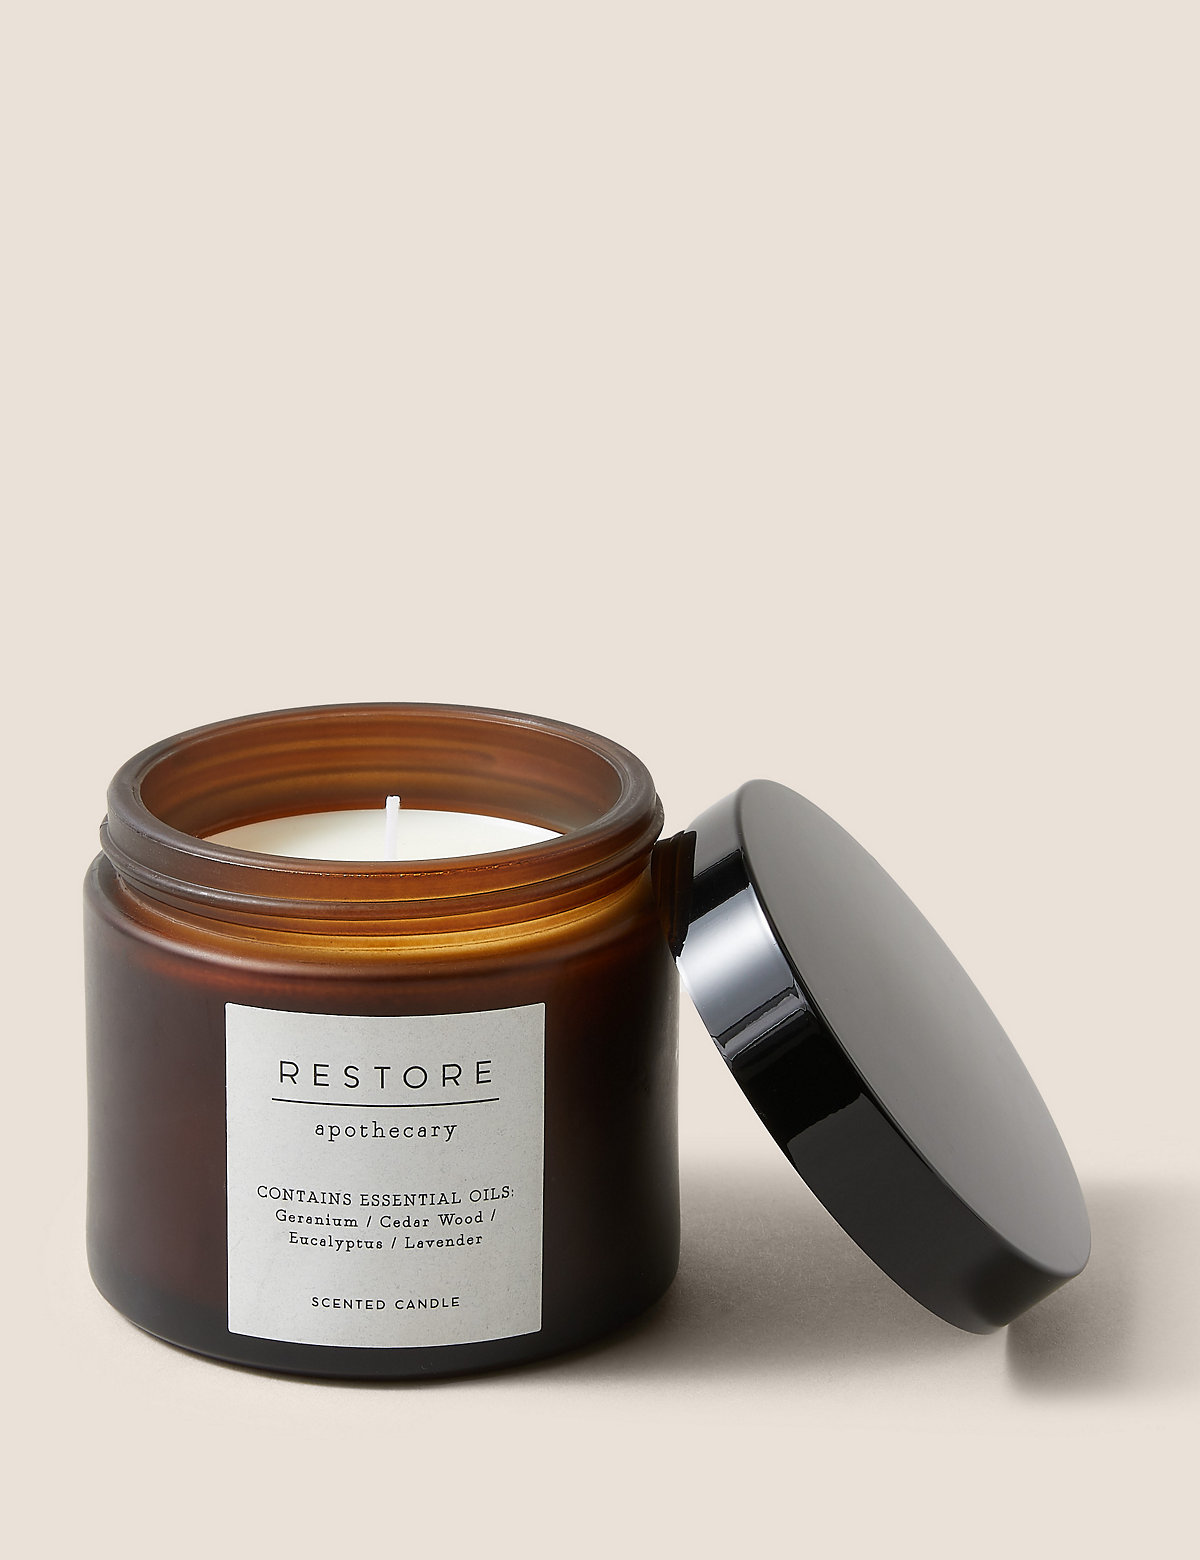 Apothecary Restore Scented Candle